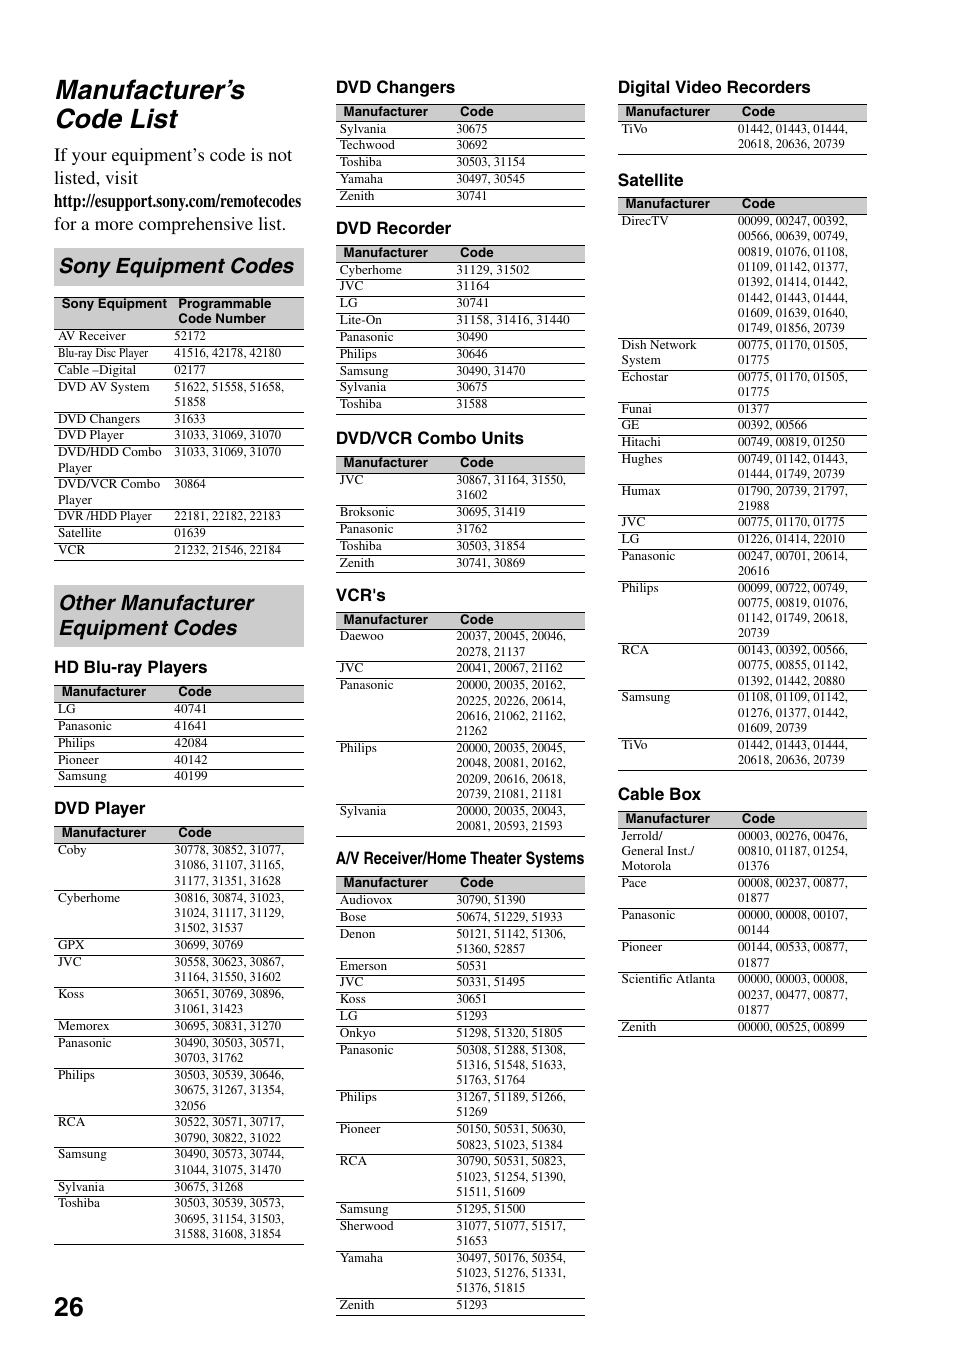 Manufacturer’s code list, Sony equipment codes, Other manufacturer equipment codes | 26 manufacturer’s code list | Sony KDL-52XBR7 User Manual | Page 26 / 60